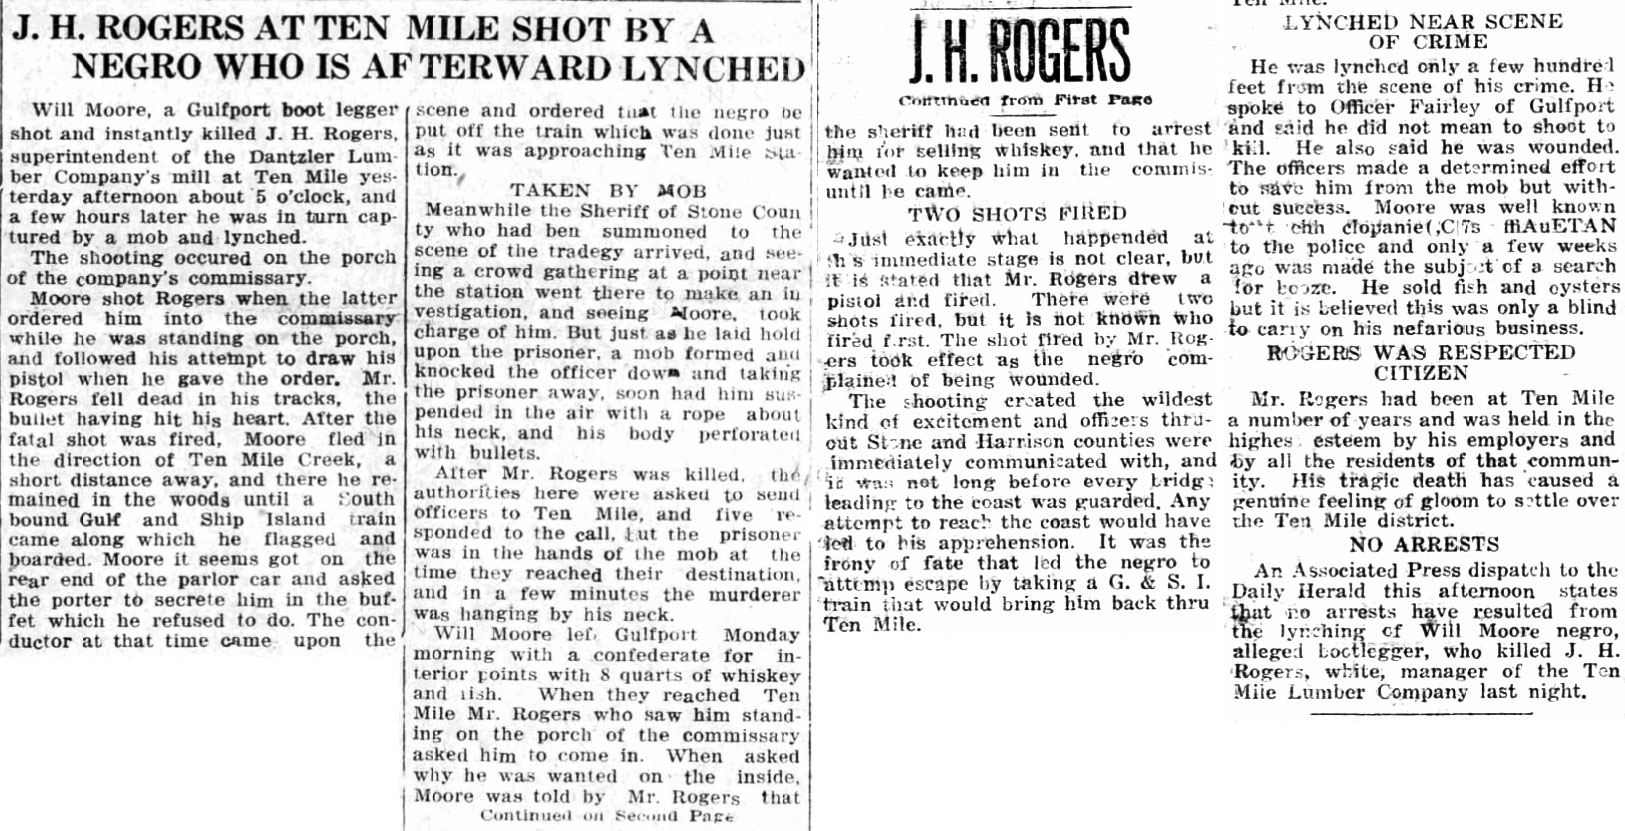 Newspaper clippings of an old article titled: "J. H. Rogers at Ten Mile Shot by a Negro who is Afterward Lynched"